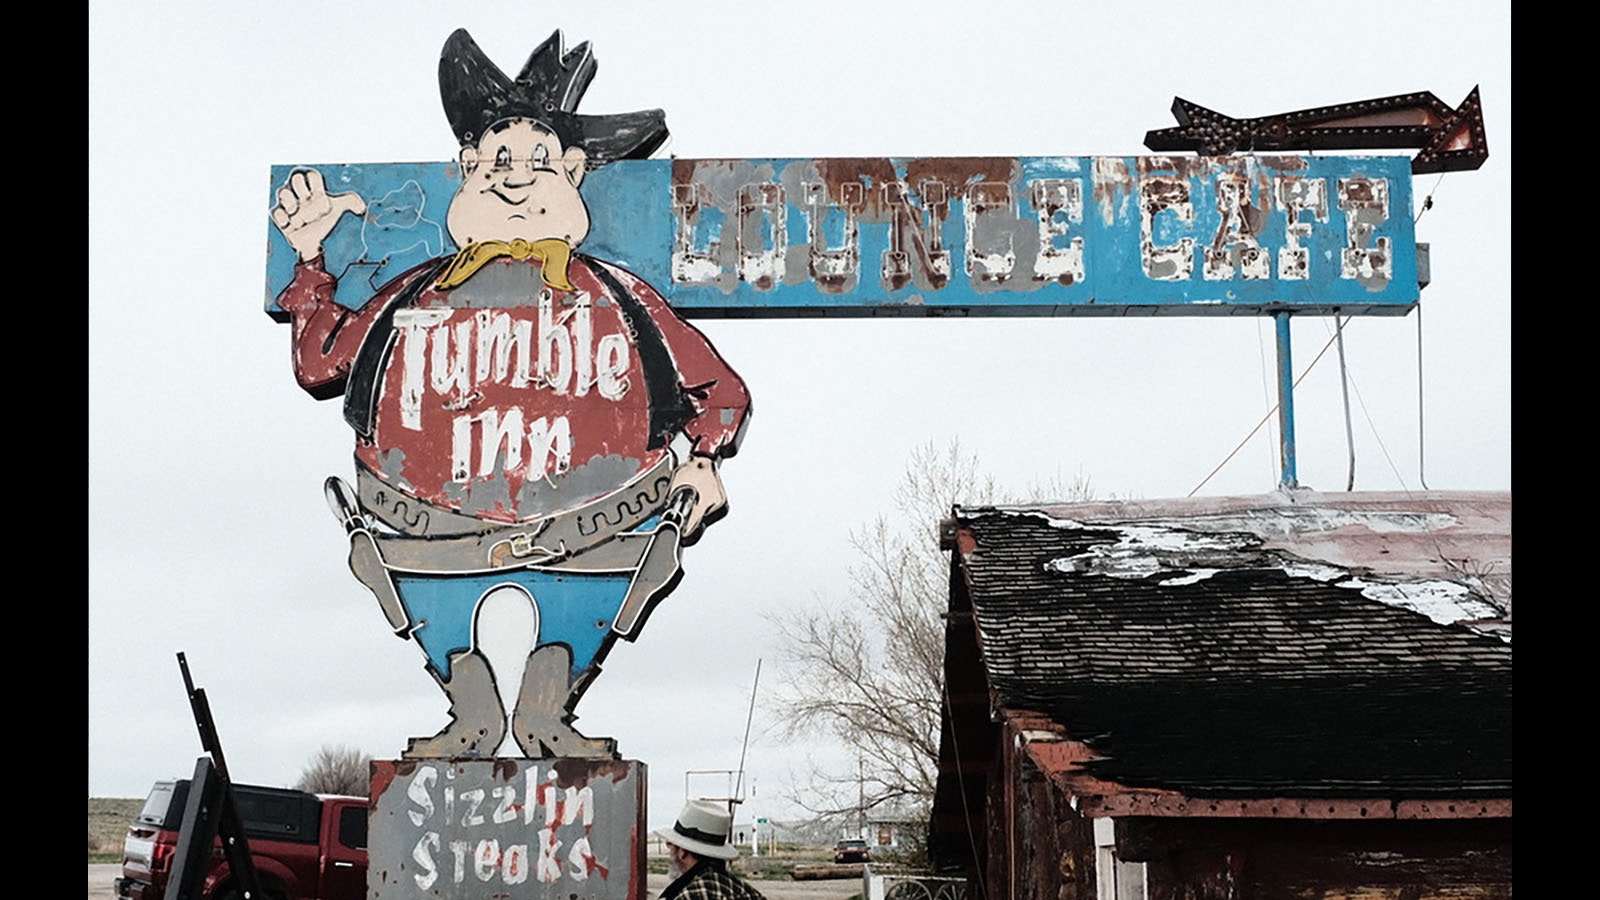 The Tumble Inn sign before its hat and top of the cowboy's head was removed to begin restoration. When they saw the top off of it, some people speculated wind had blown the top off.